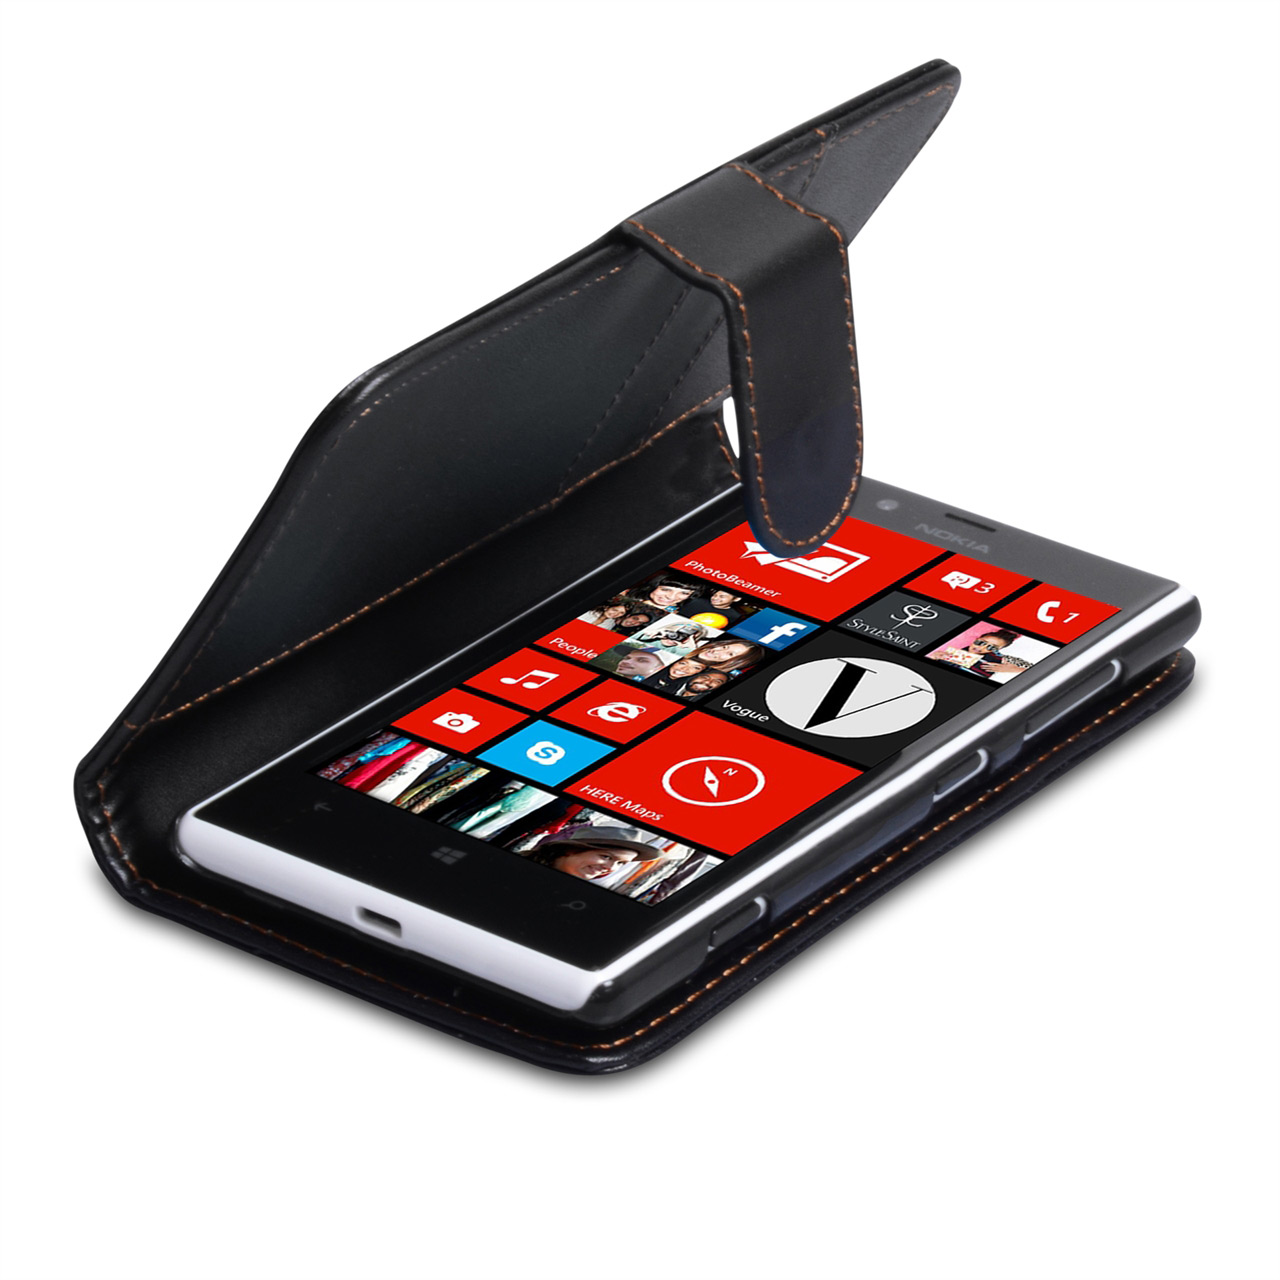 YouSave Accessories Nokia Lumia 720 Leather Effect Wallet Case - Black